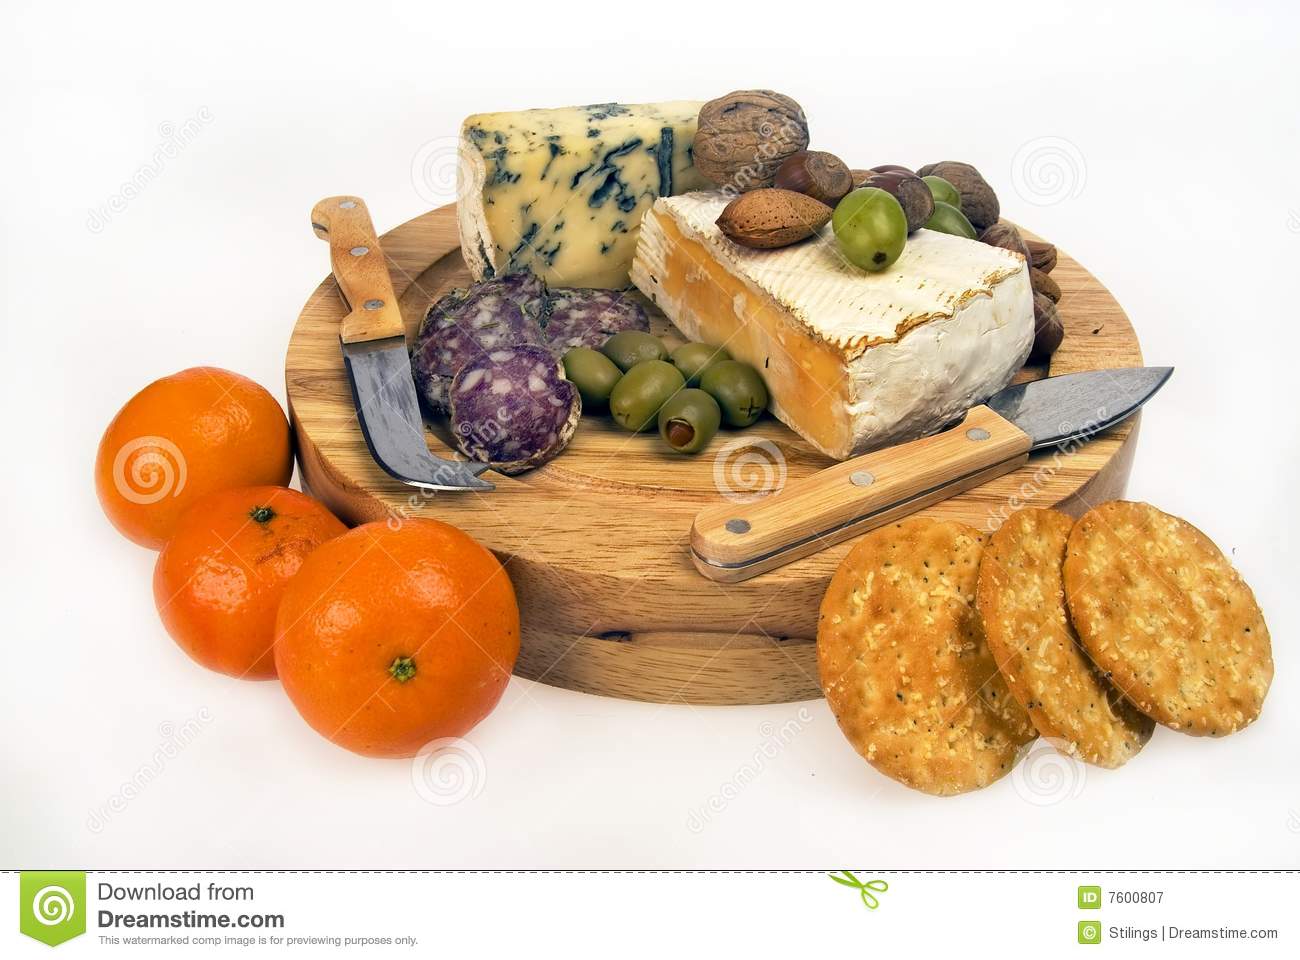 Cheese And Fruit Plate Royalty Free Stock Photography   Image  7600807